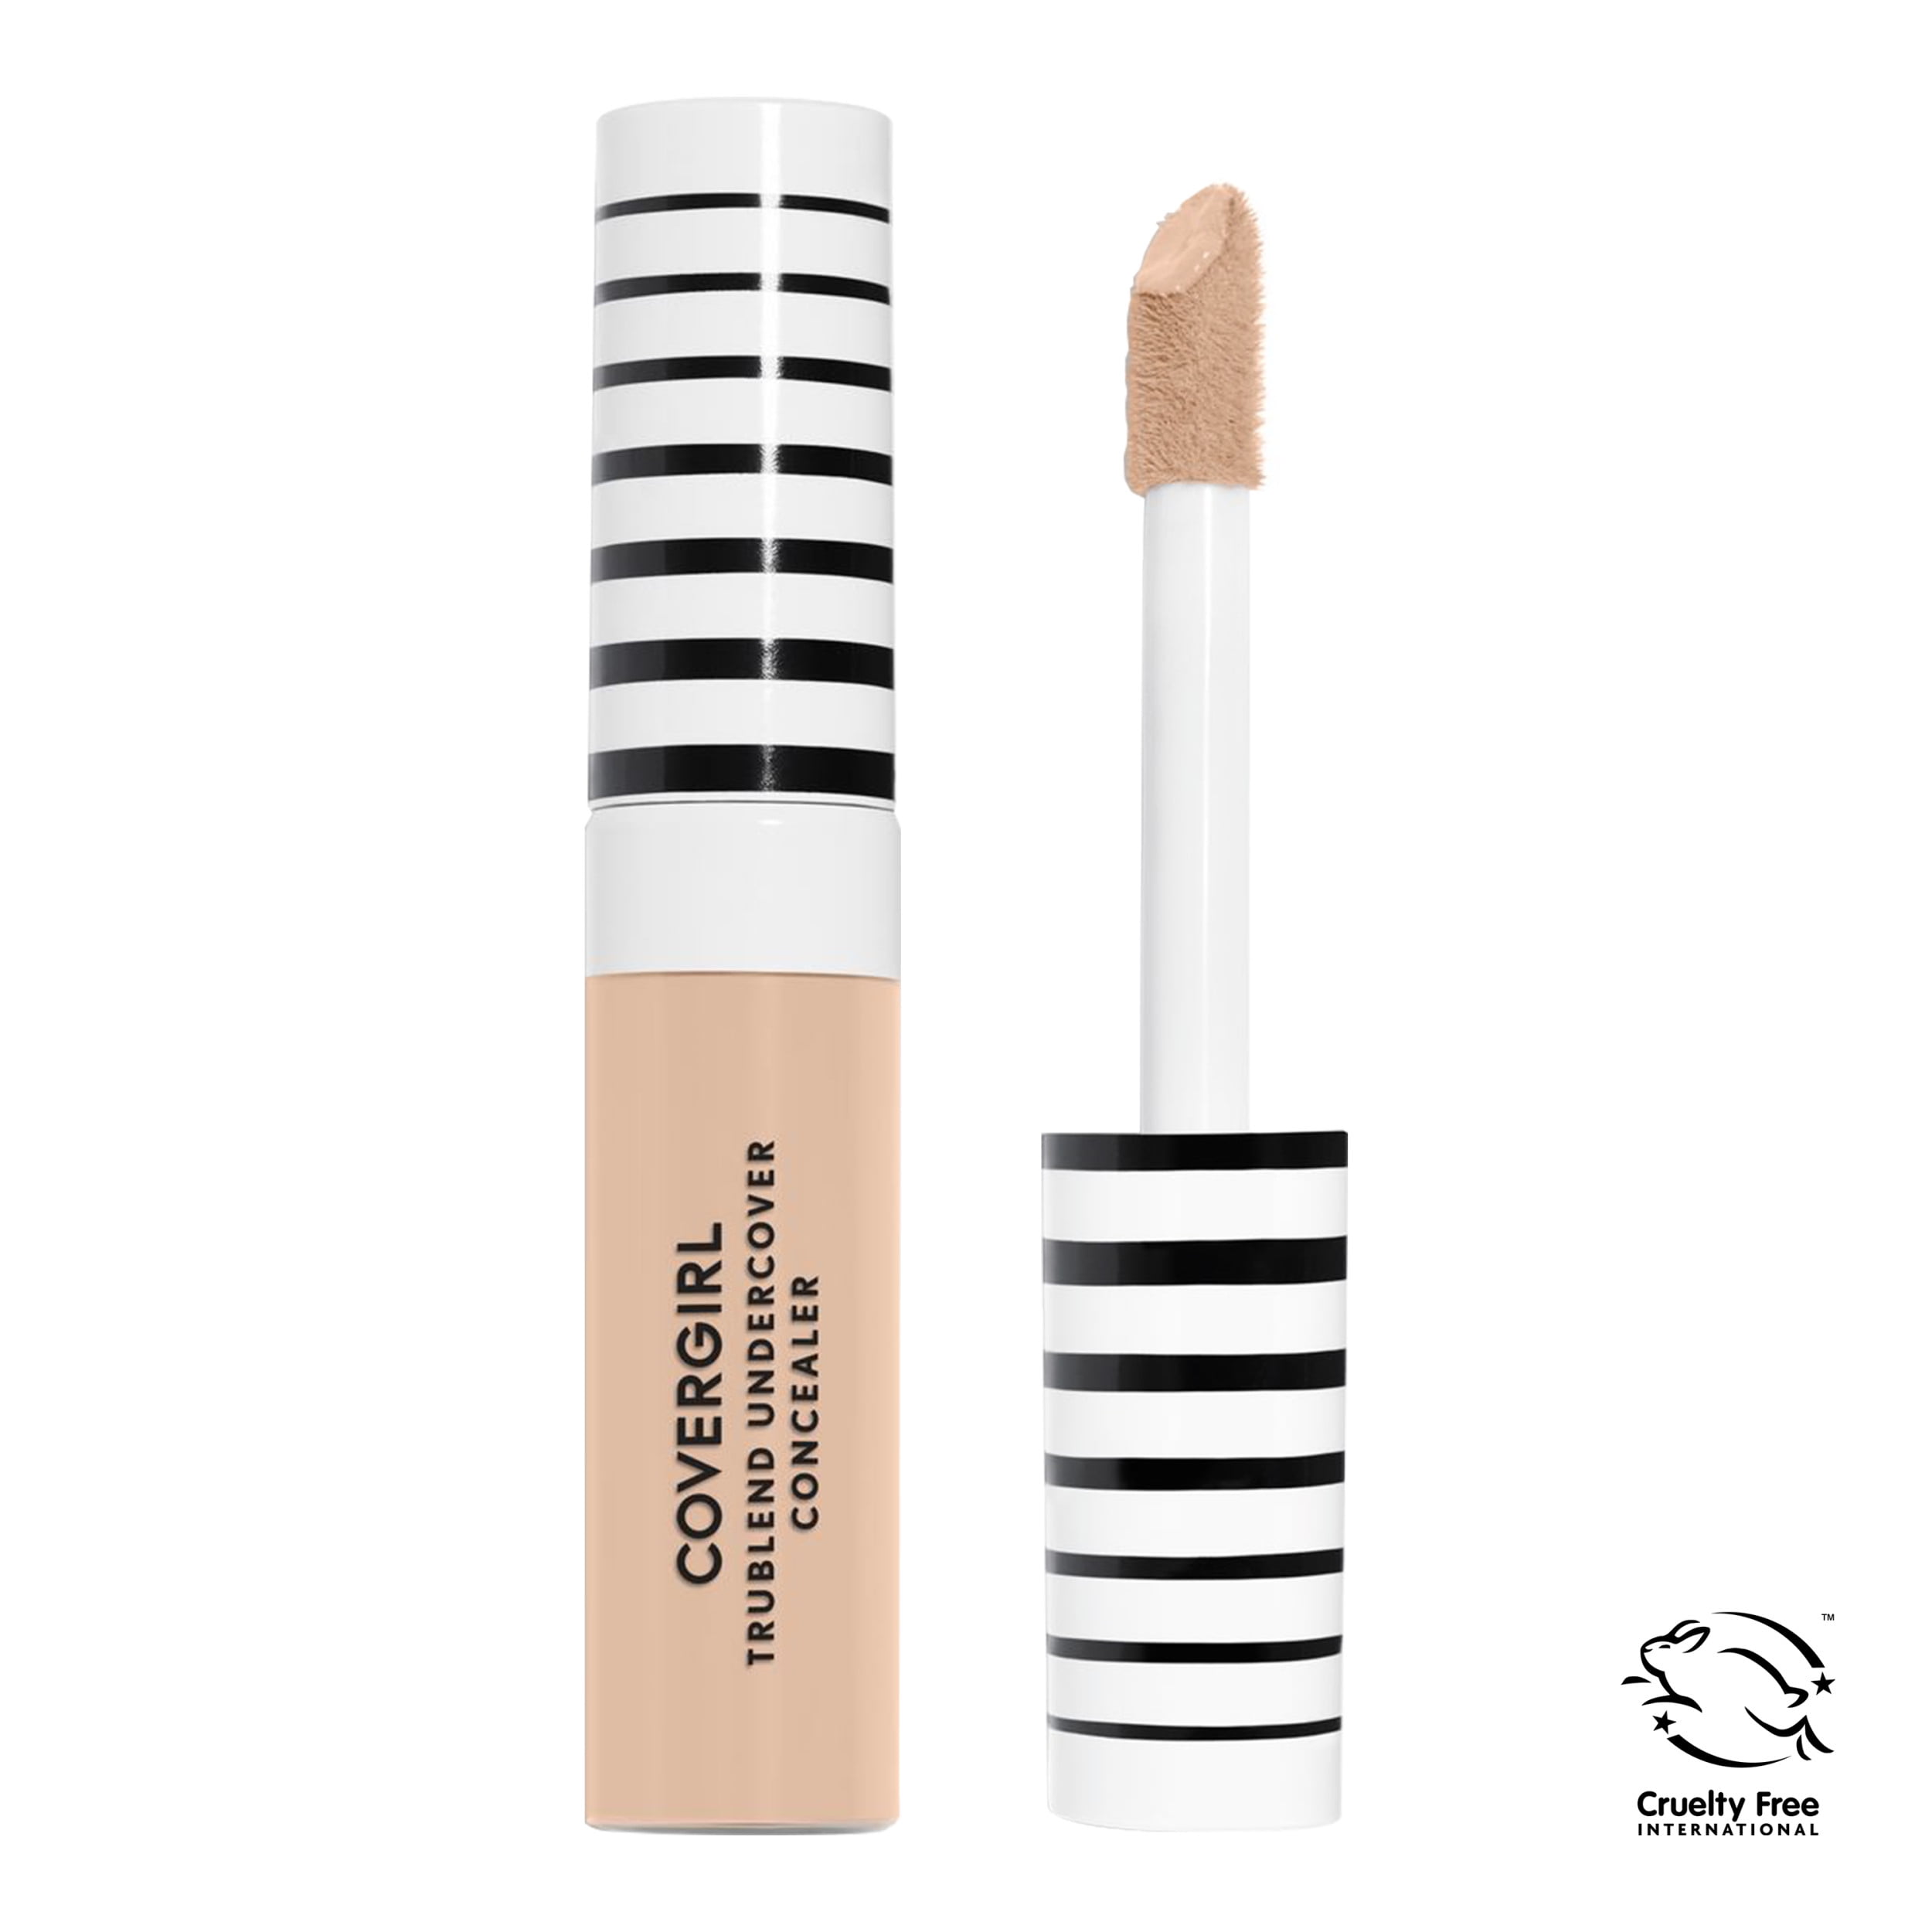 COVERGIRL TruBlend Undercover Concealer, Classic Ivory, 0.33 oz, Undereye Concealer, Concealer Makeup, Full Coverage Concealer, Concealer for Dark Circles, 30 Shades